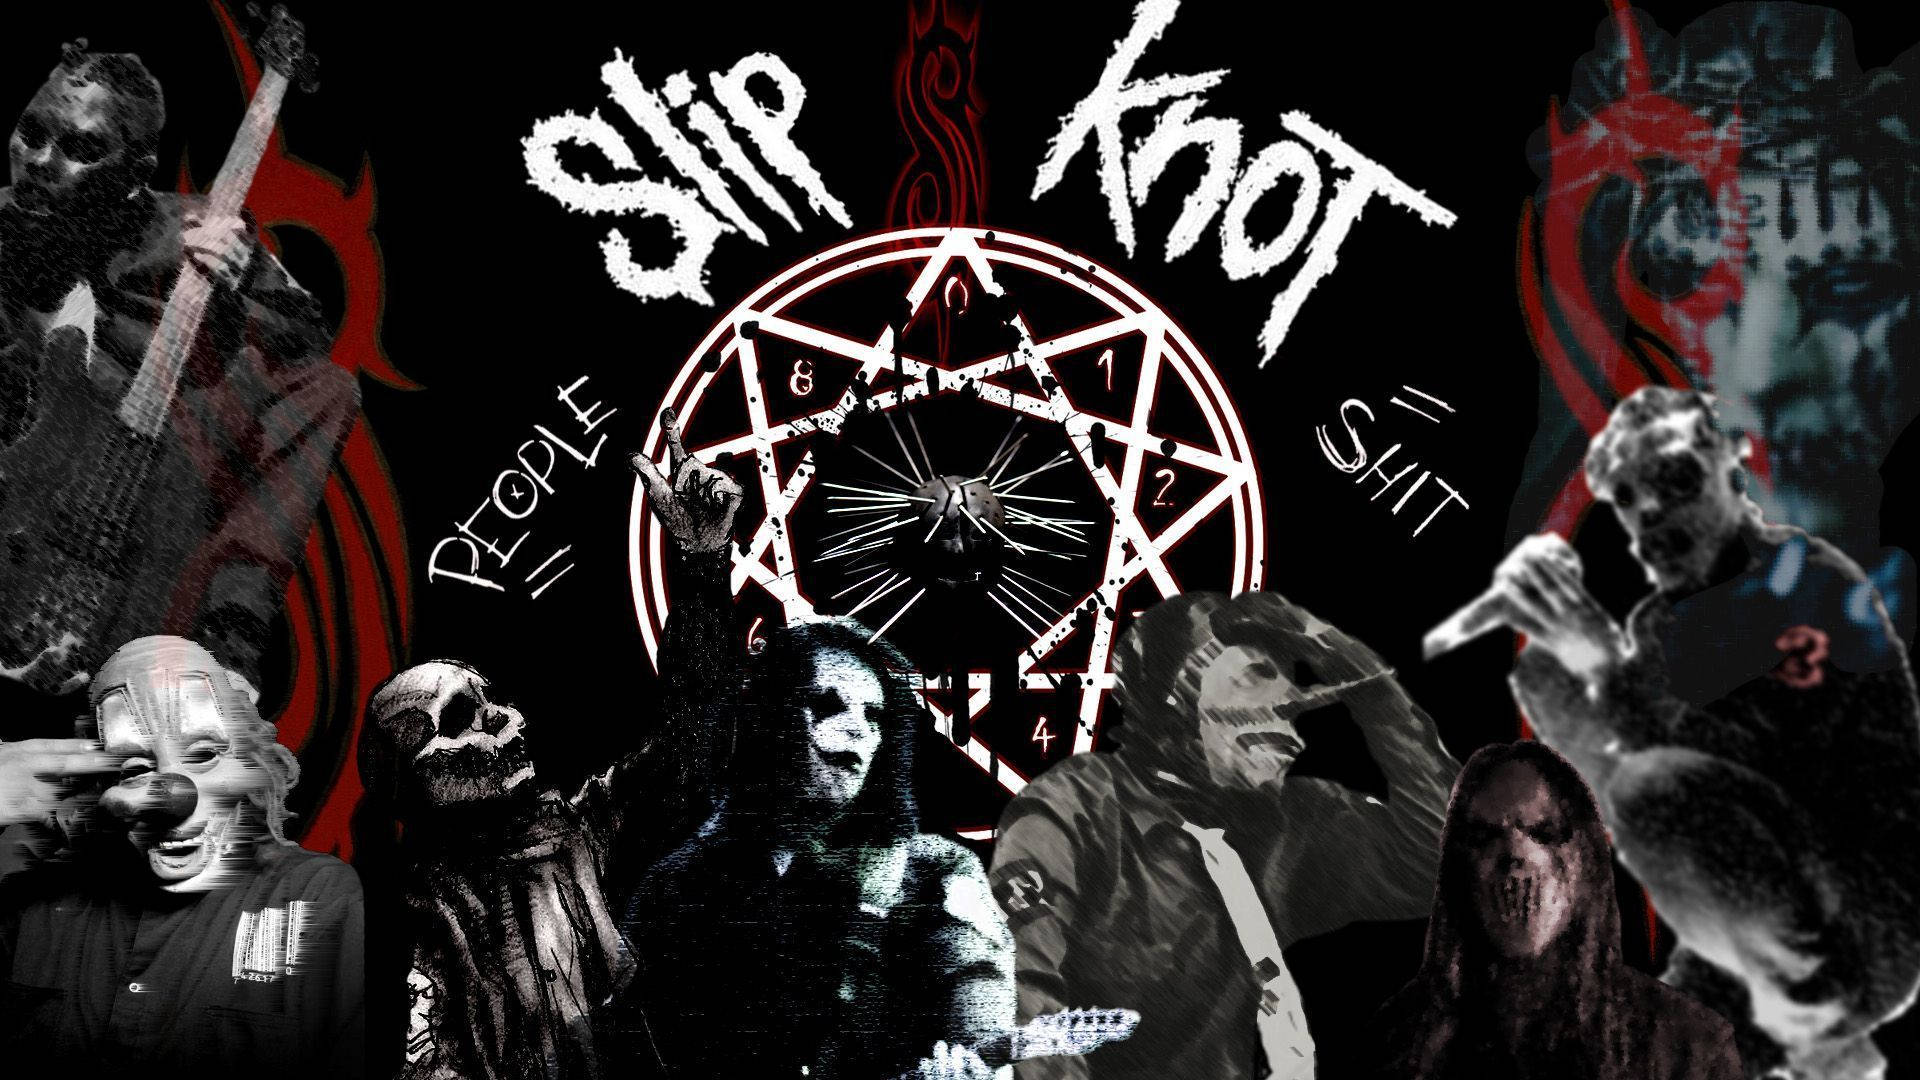 Slipknot Band Fan-made Collage Background